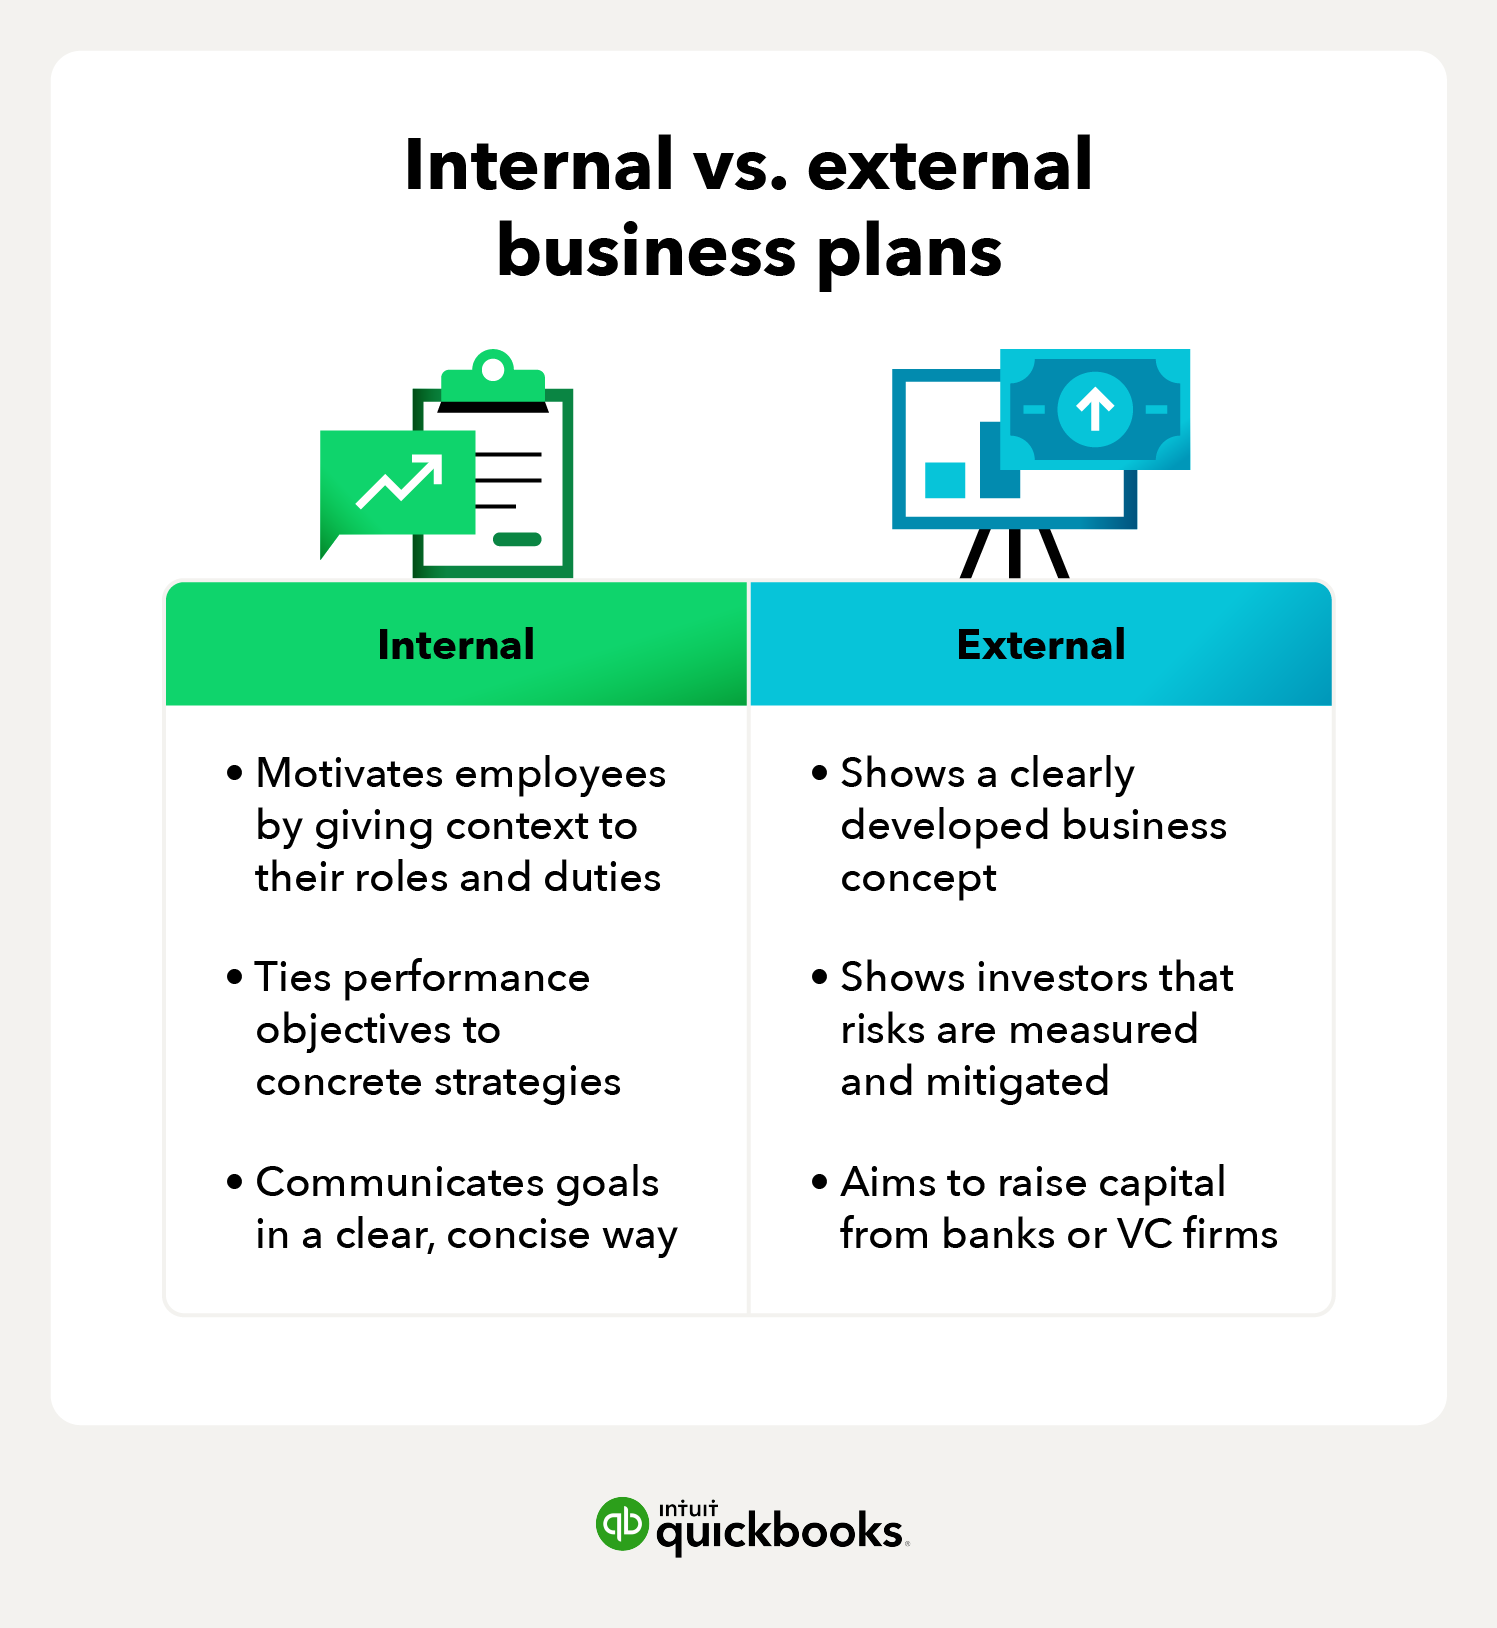 Table showing differences between internal and external business plans